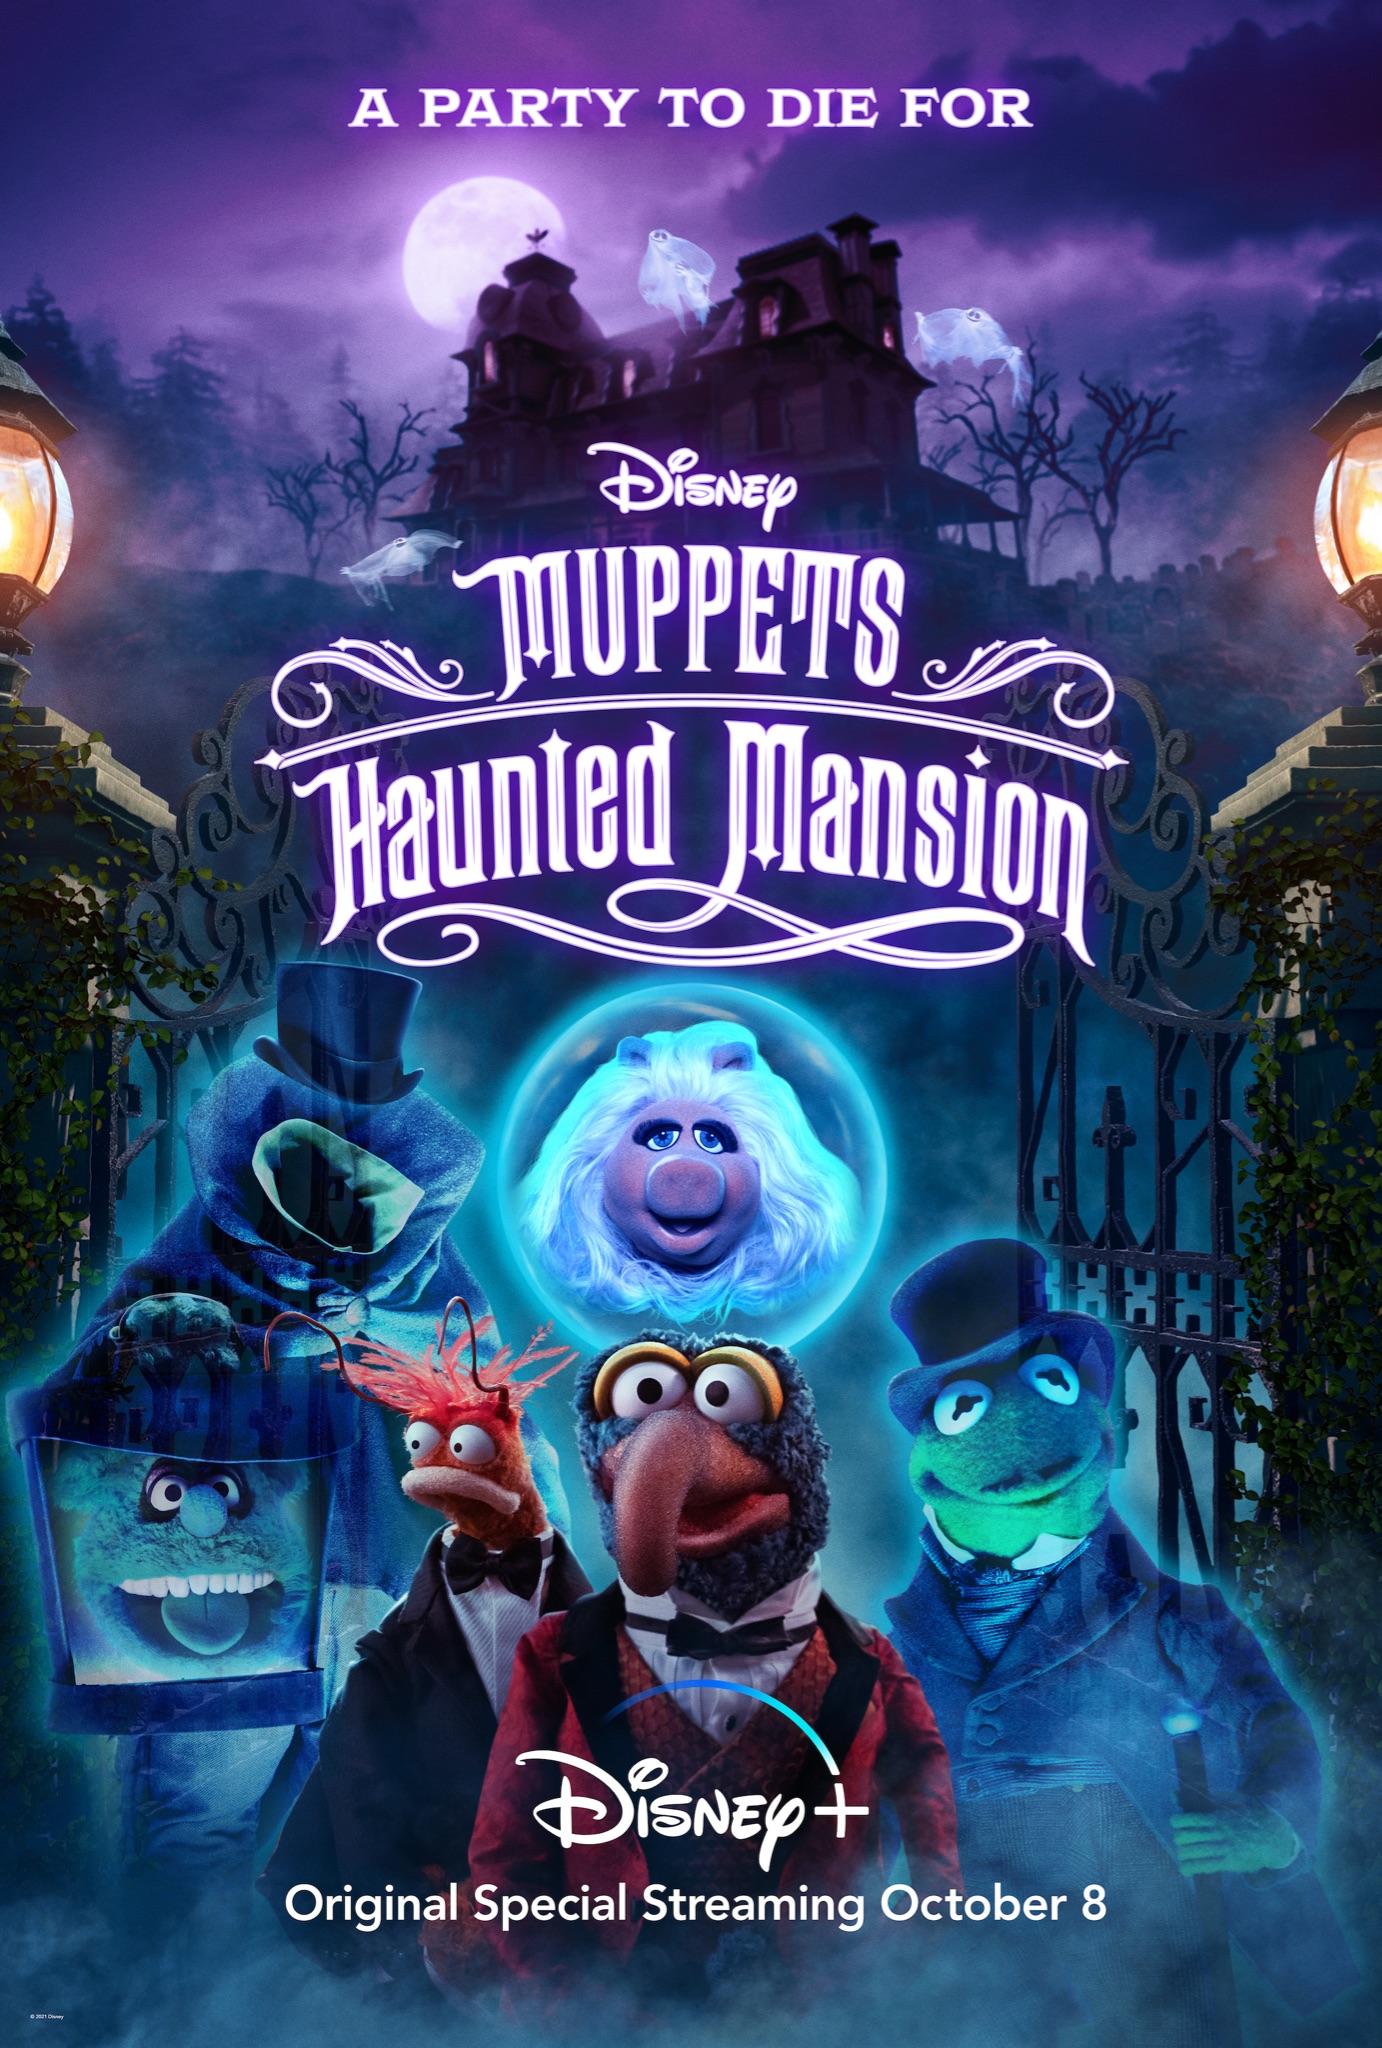 Hallowstream Returns To Disney Plus With New Specials LRM